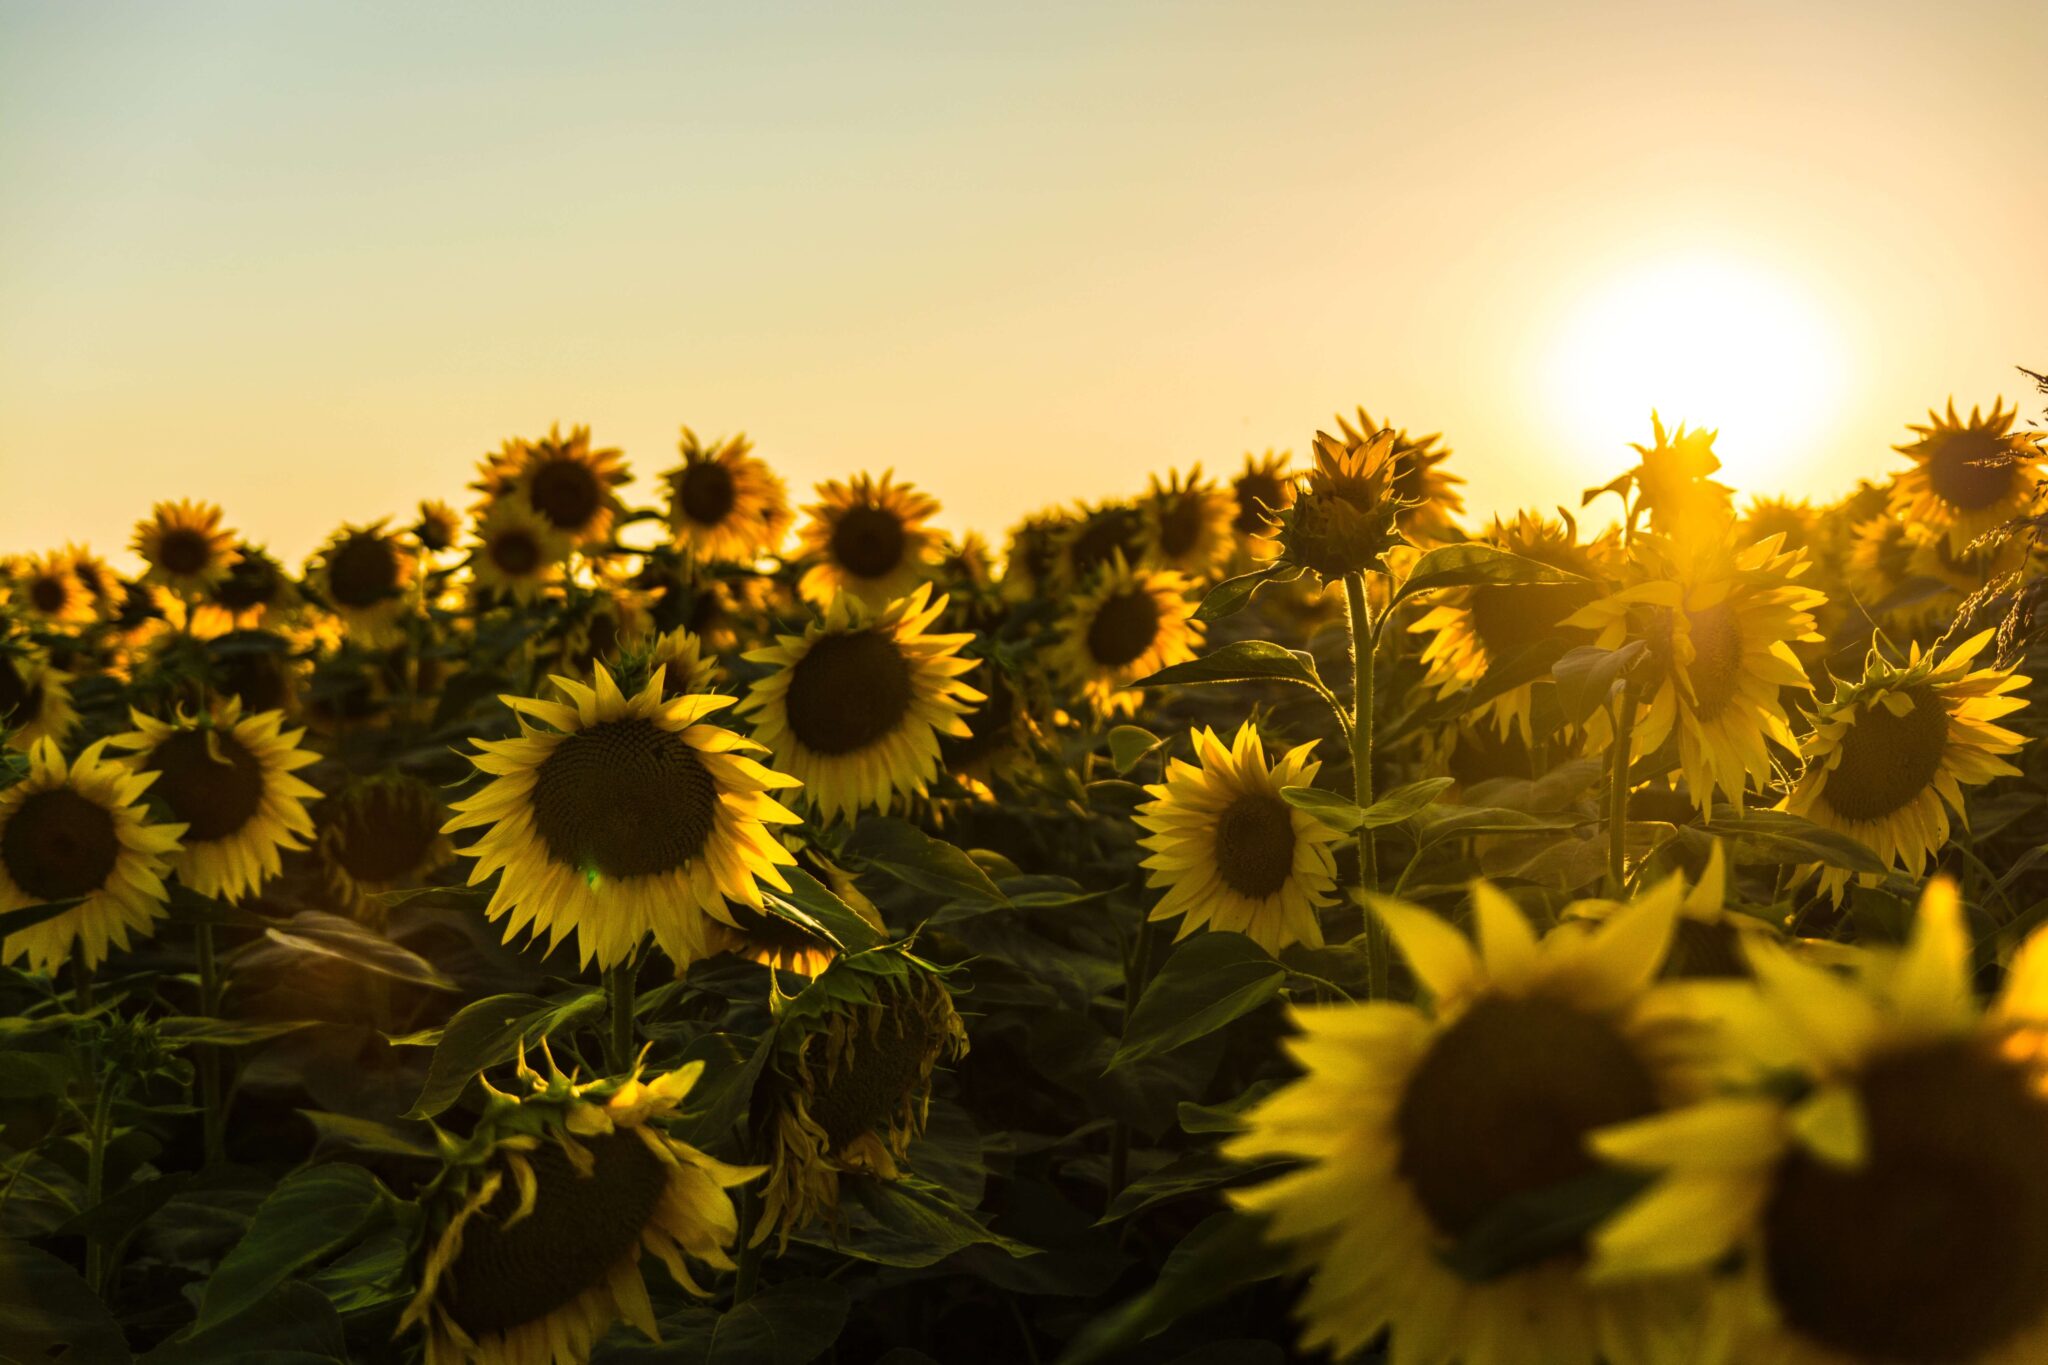 A field of sunflowers with the sun setting behind it.